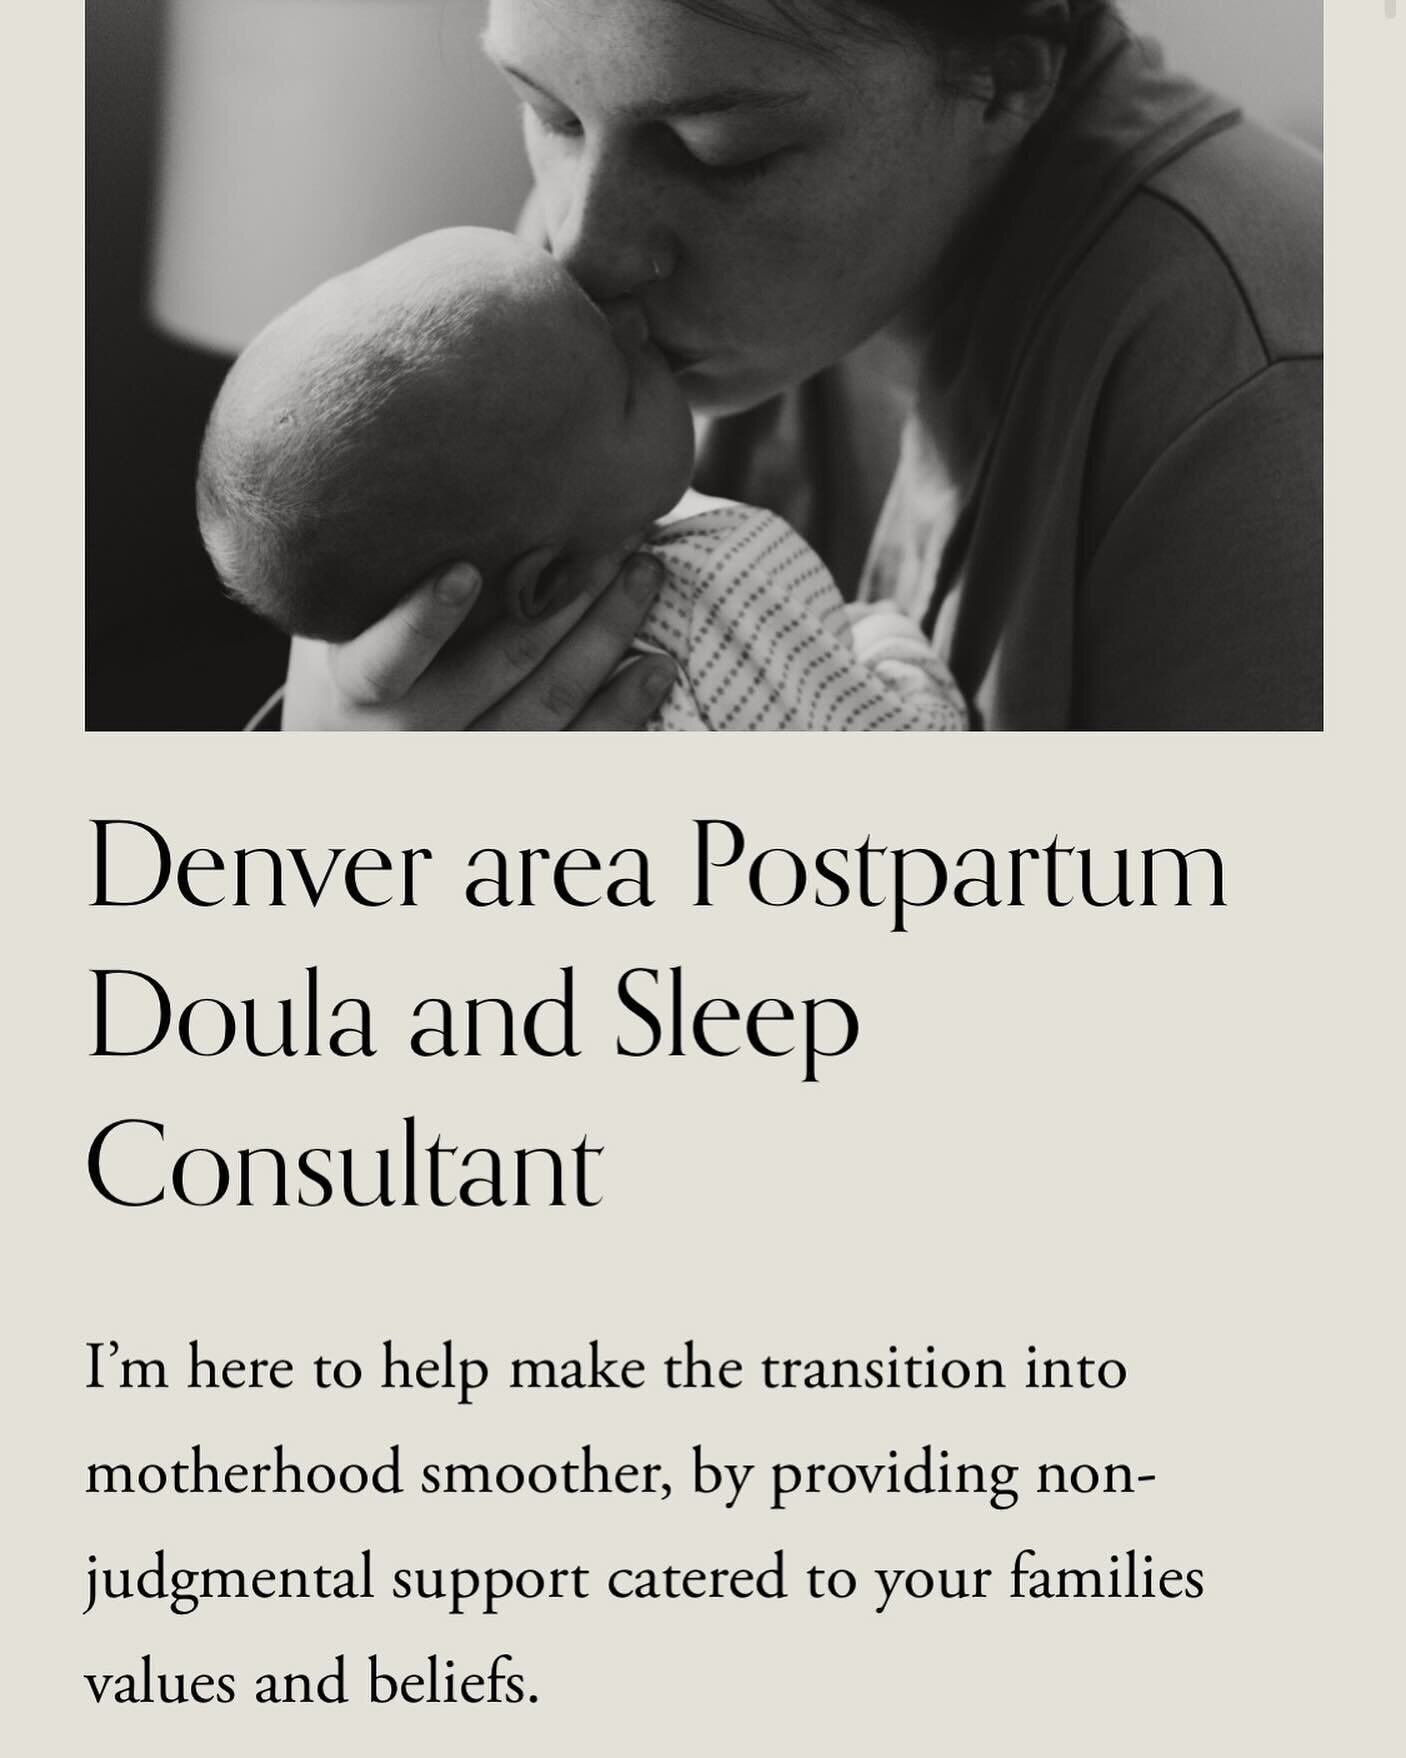 My business is expanding!  Last year I worked hard and officially became certified as a Pediatric Sleep Consultant!  Working as a Postpartum Doula, I have witnessed how sleep deprivation can affect the mental health of parents, and it&rsquo;s somethi